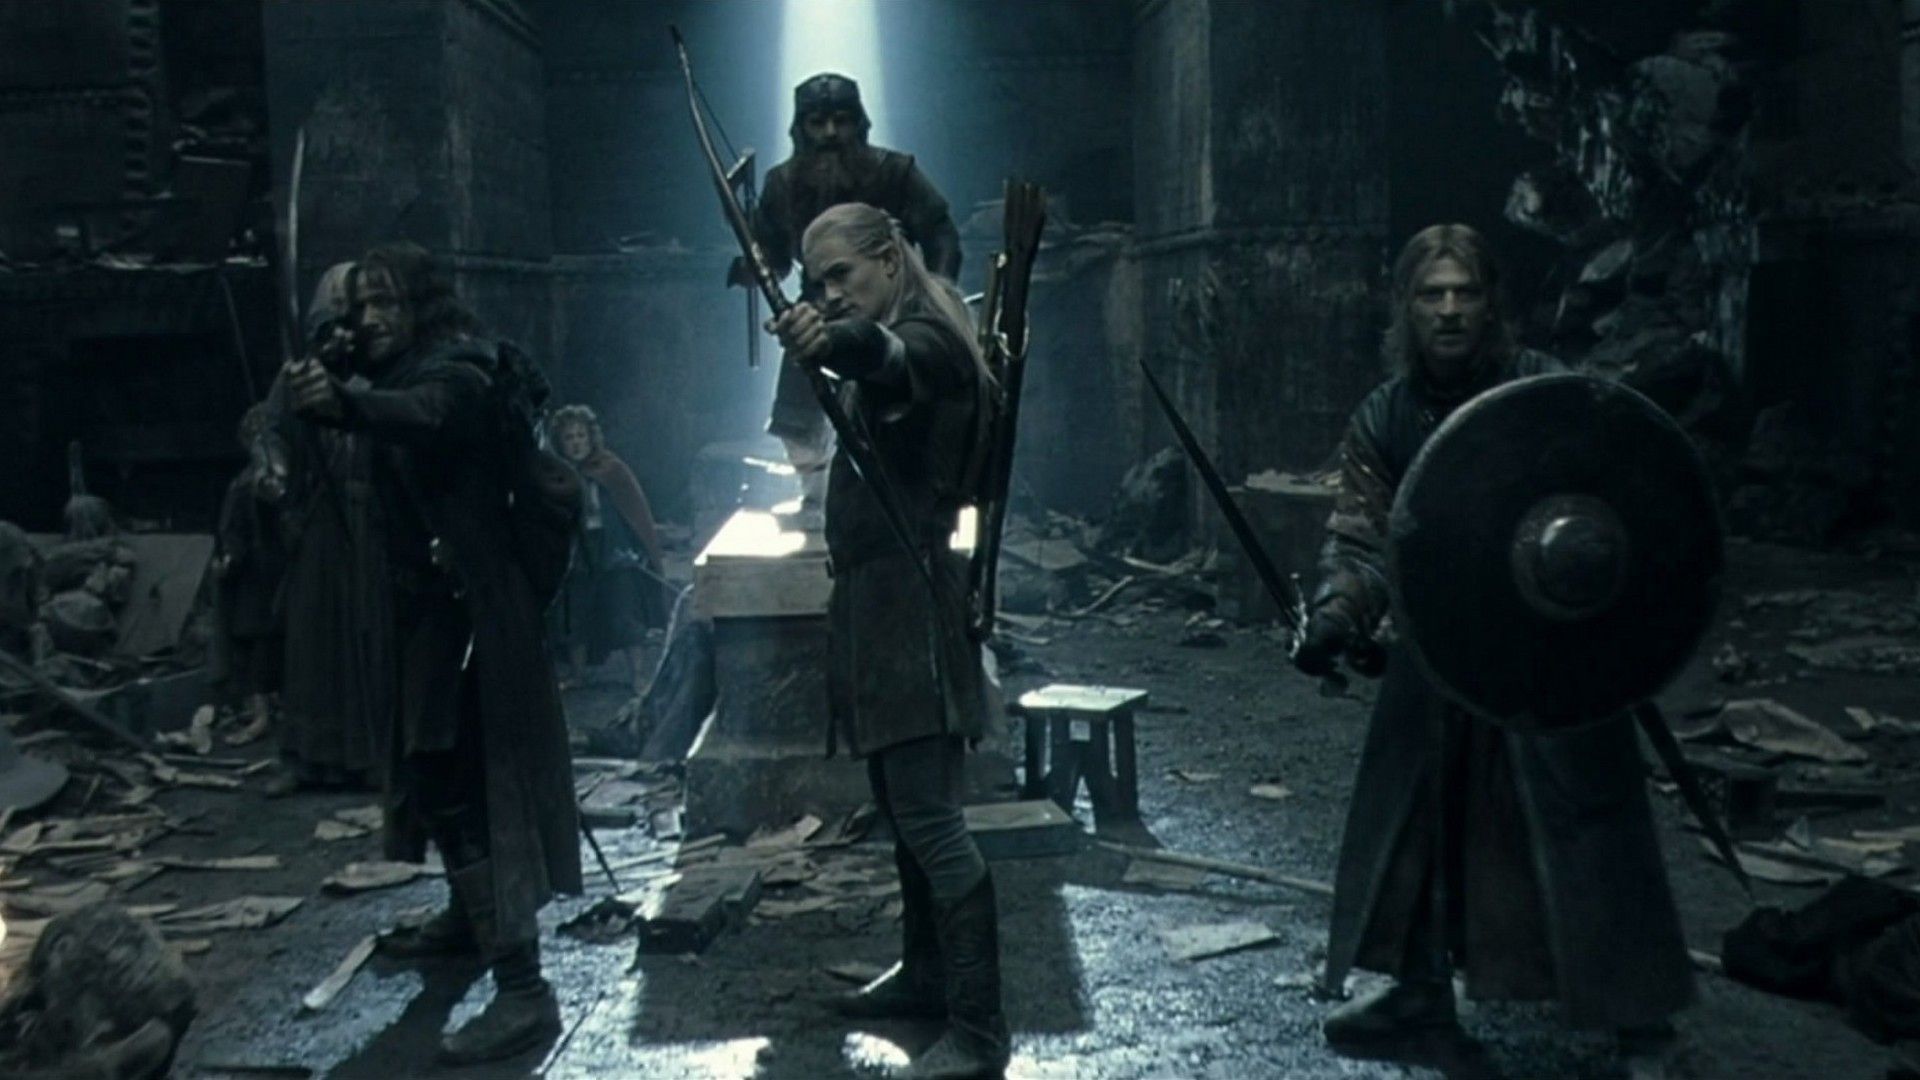 download the last version for android The Lord of The Rings Return to Moria